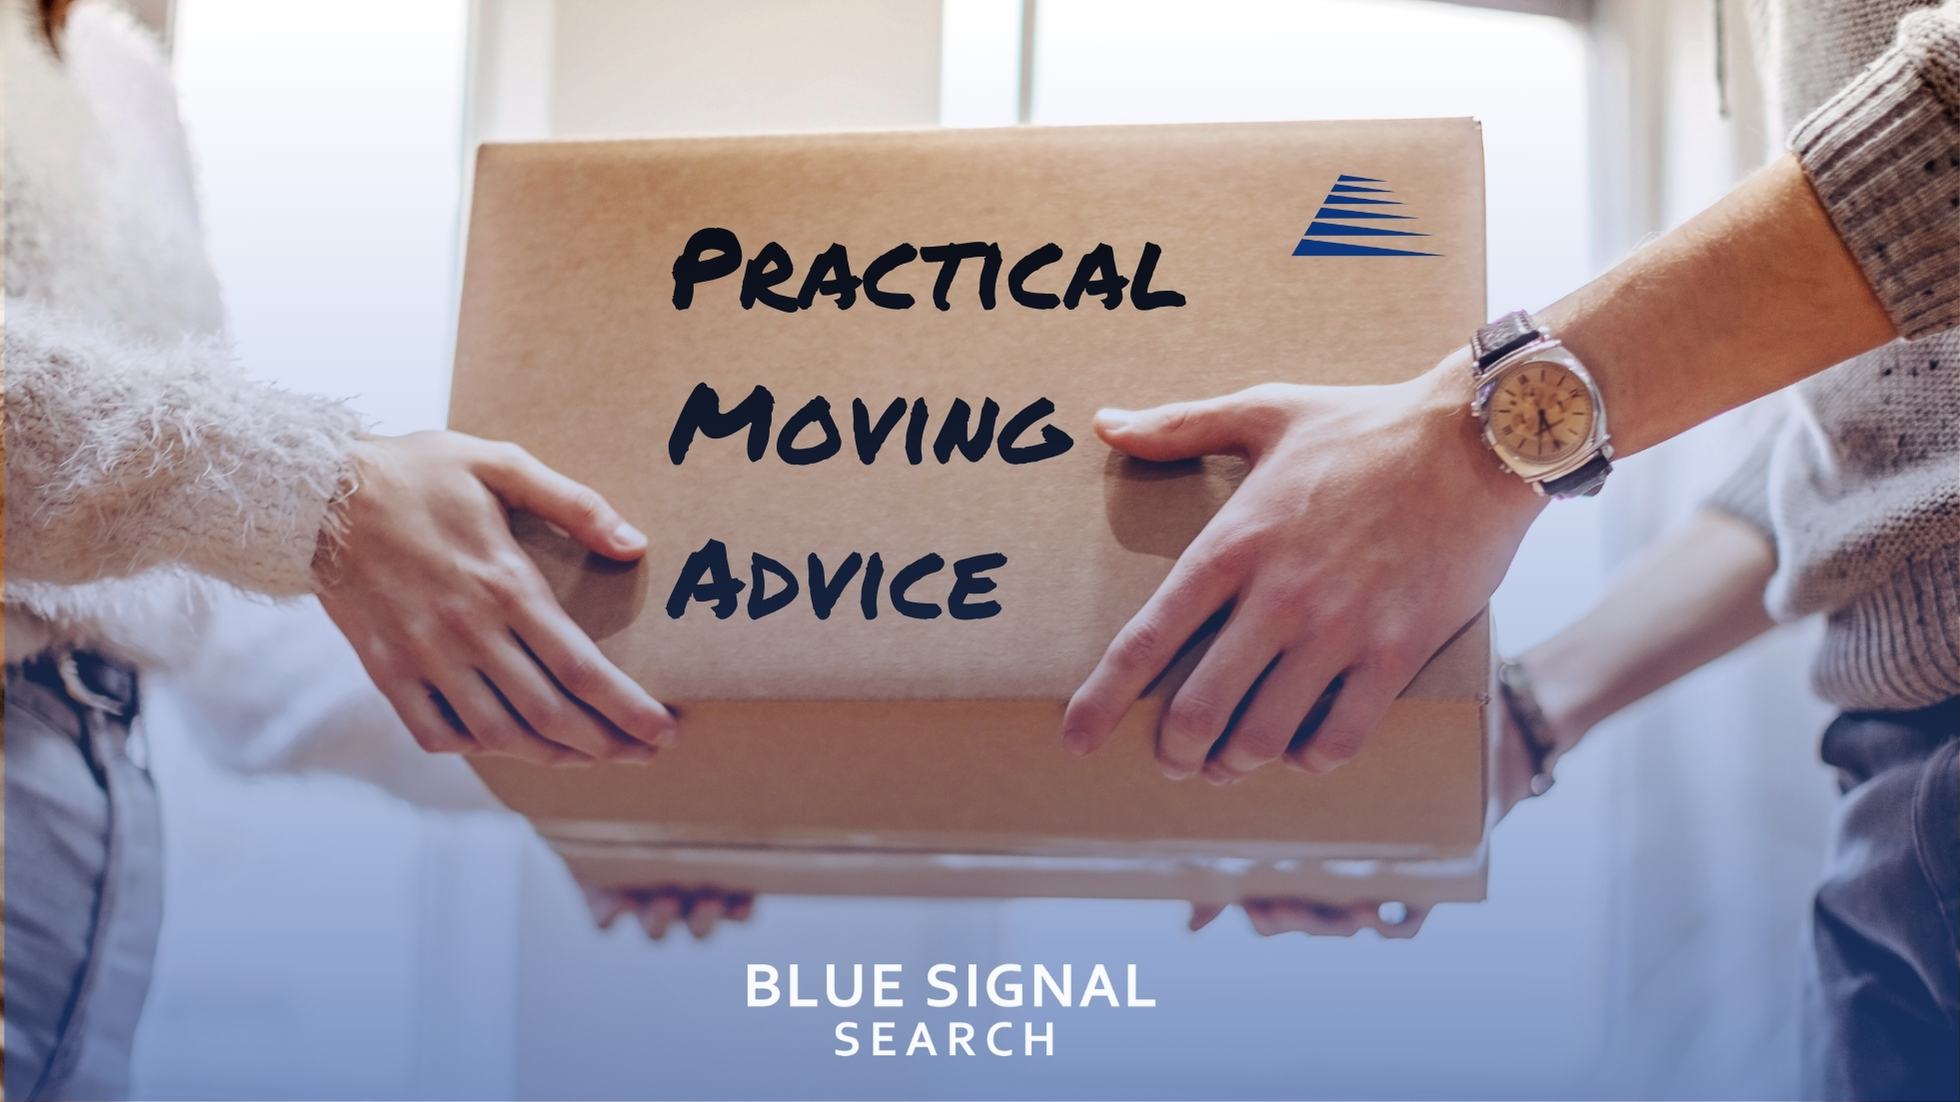 Two people holding a cardboard box with the words 'Practical Moving Advice' written on it, against a backdrop with the Blue Signal Search logo.